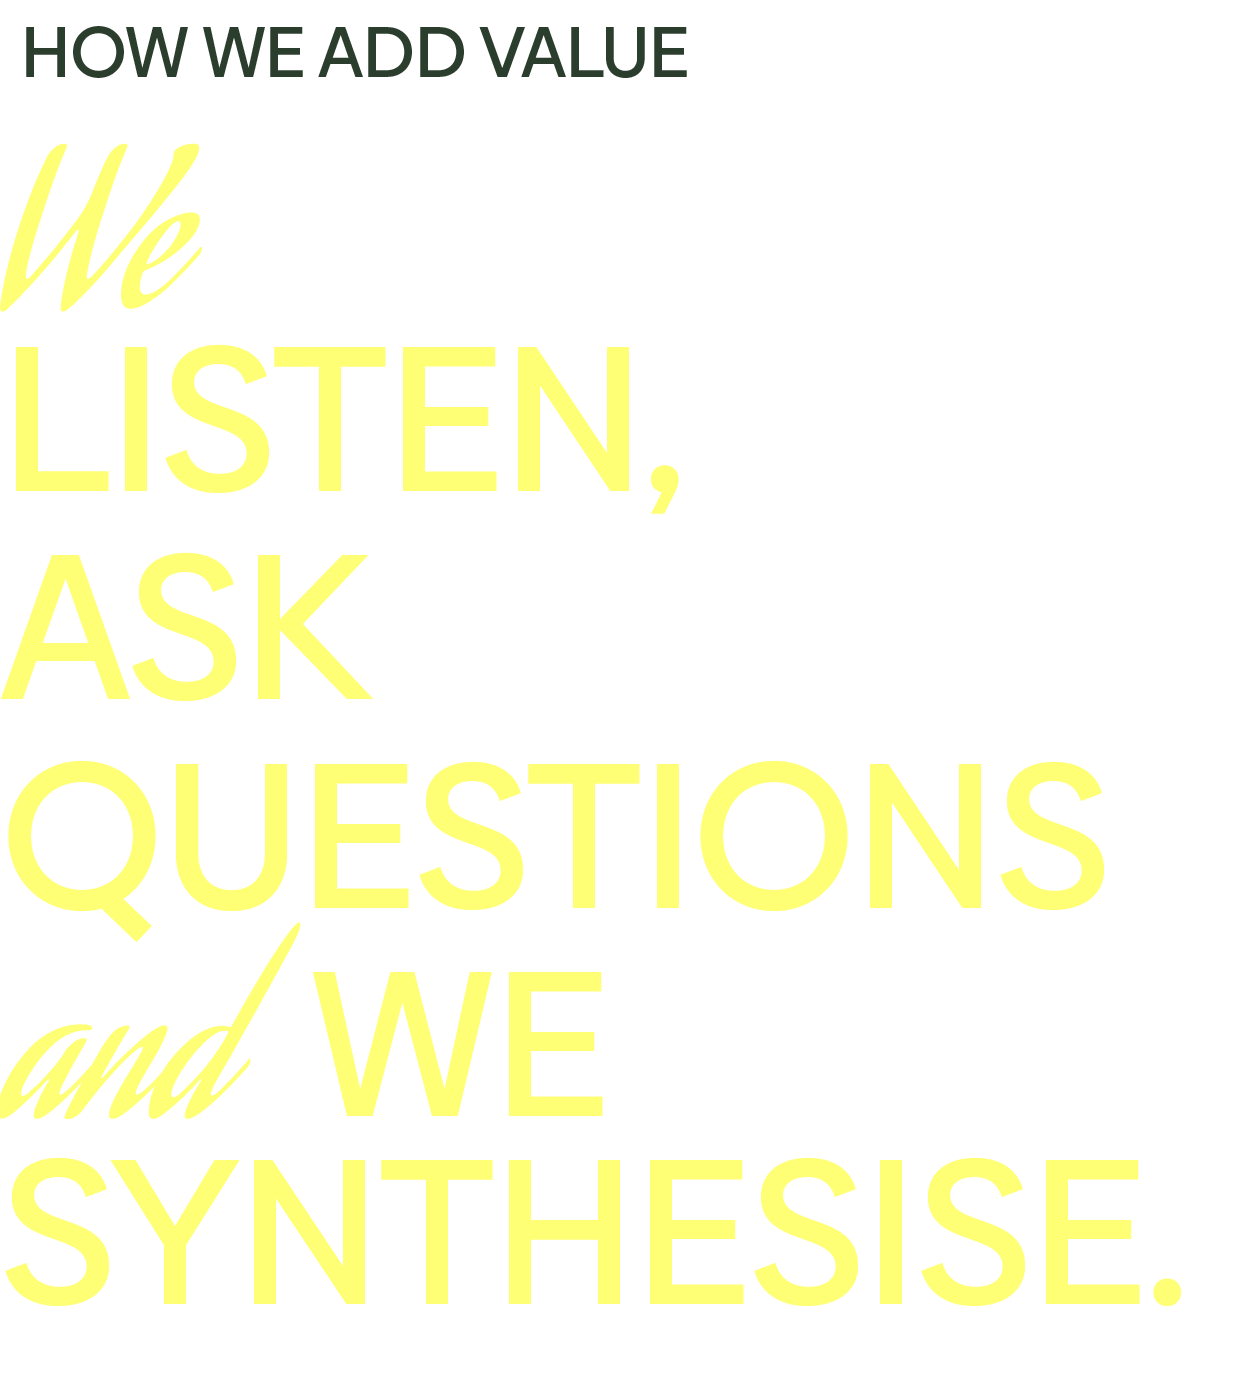 We LISTEN, ASK QUESTIONS and WE SYNTHESISE.